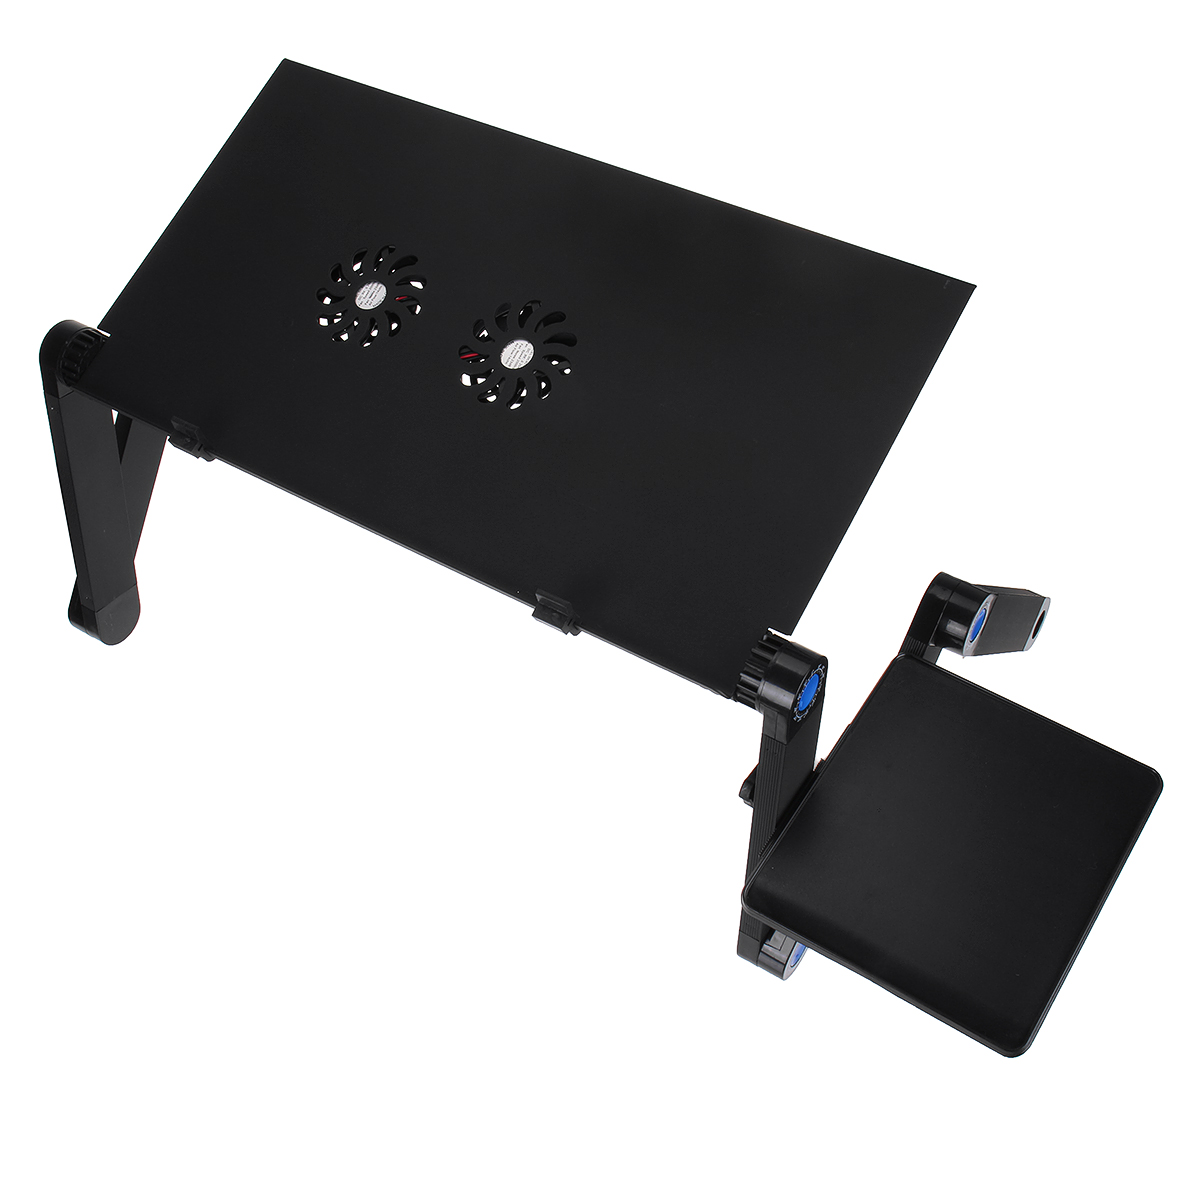 Cooling-Laptop-Desk-360-Degree-Aluminum-Alloy-Adjustable-Foldable-Cooling-Notebook-Table-for-Sofa-Be-1786133-15